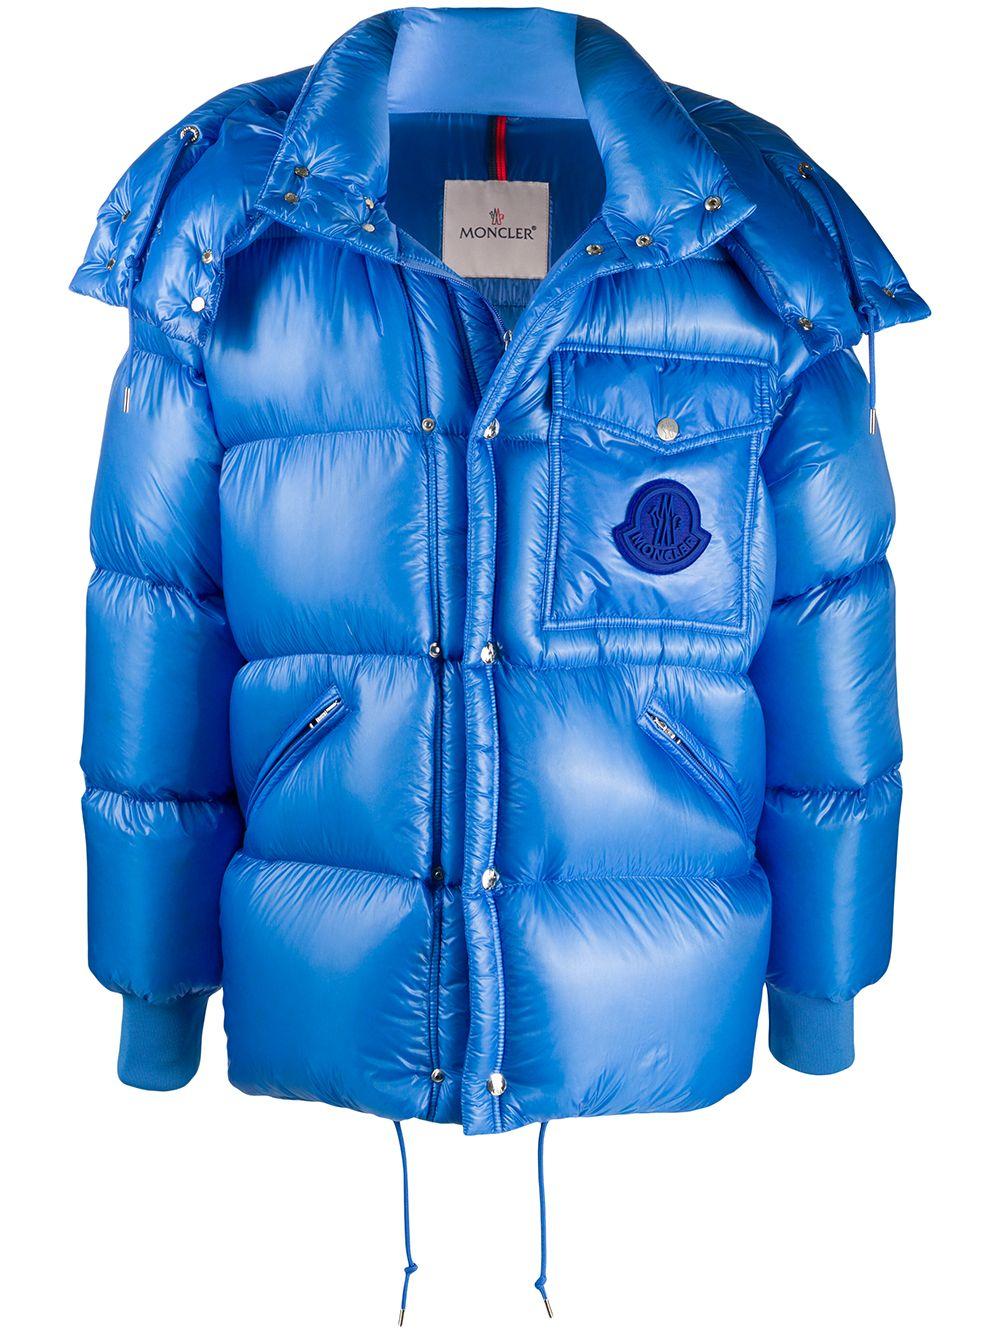 moncler quilted jacket blue,OFF 76%,www.concordehotels.com.tr